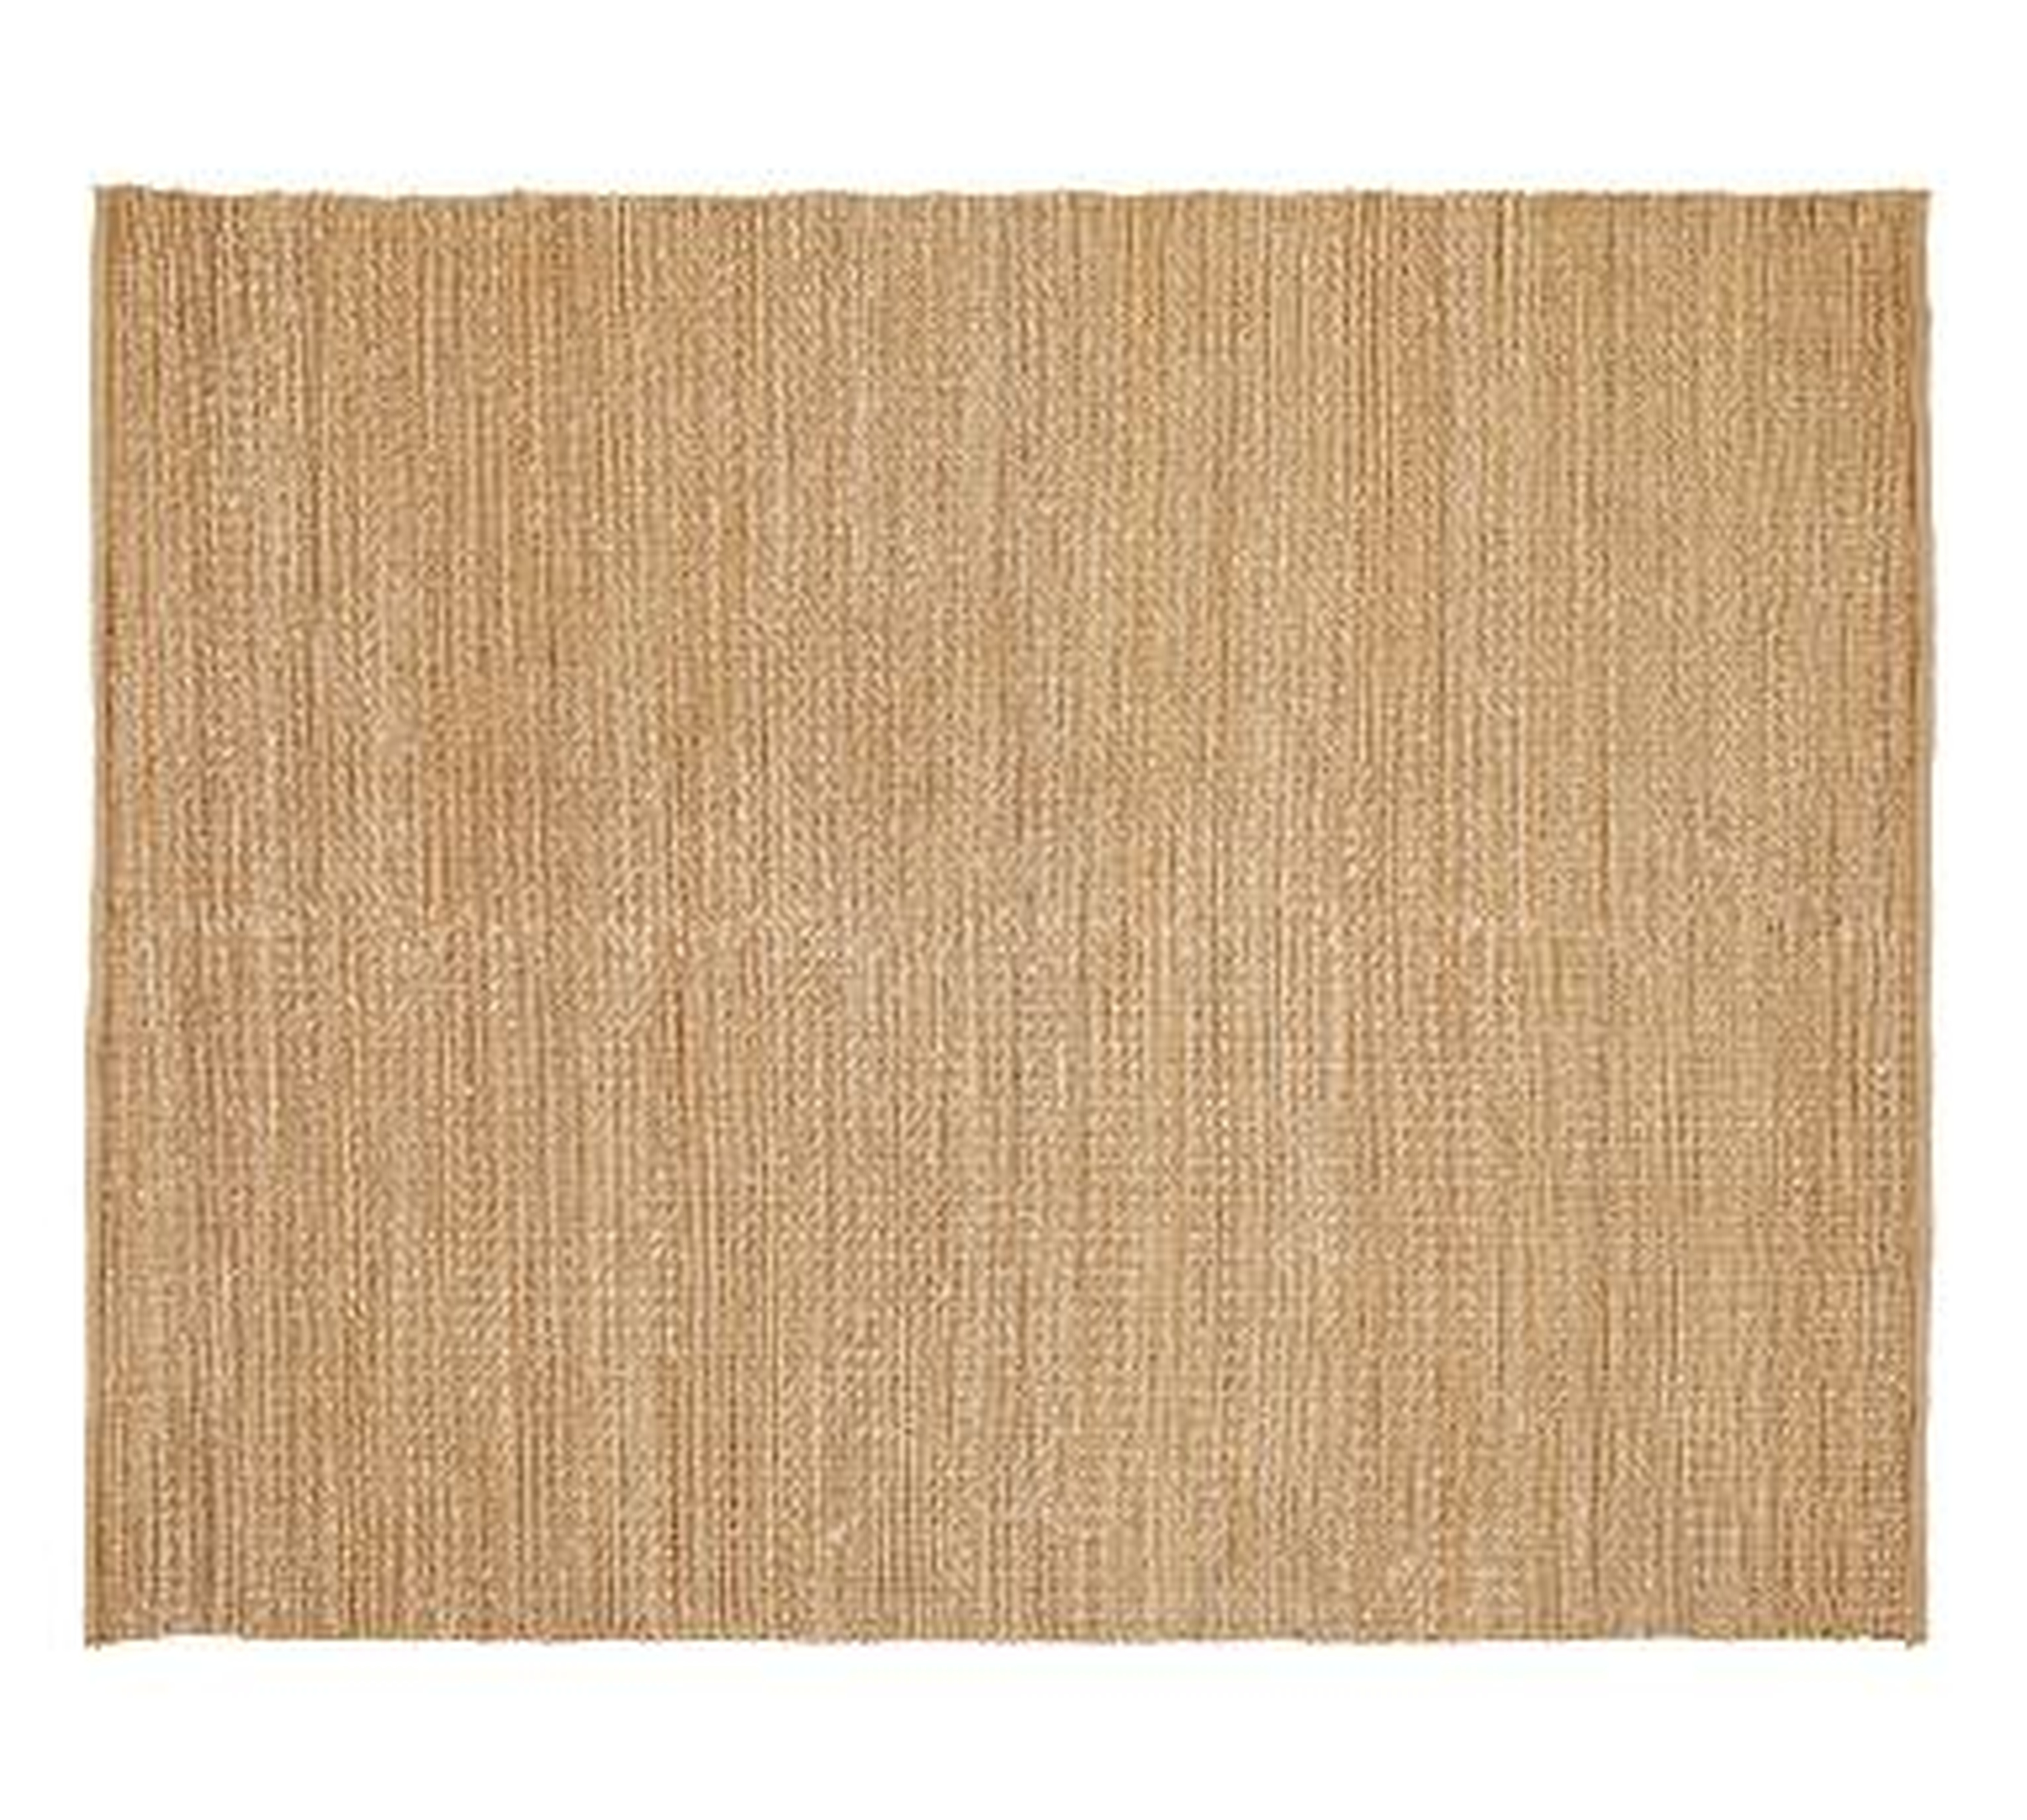 Heathered Chenille Jute Rug, 8x10', Natural - Pottery Barn